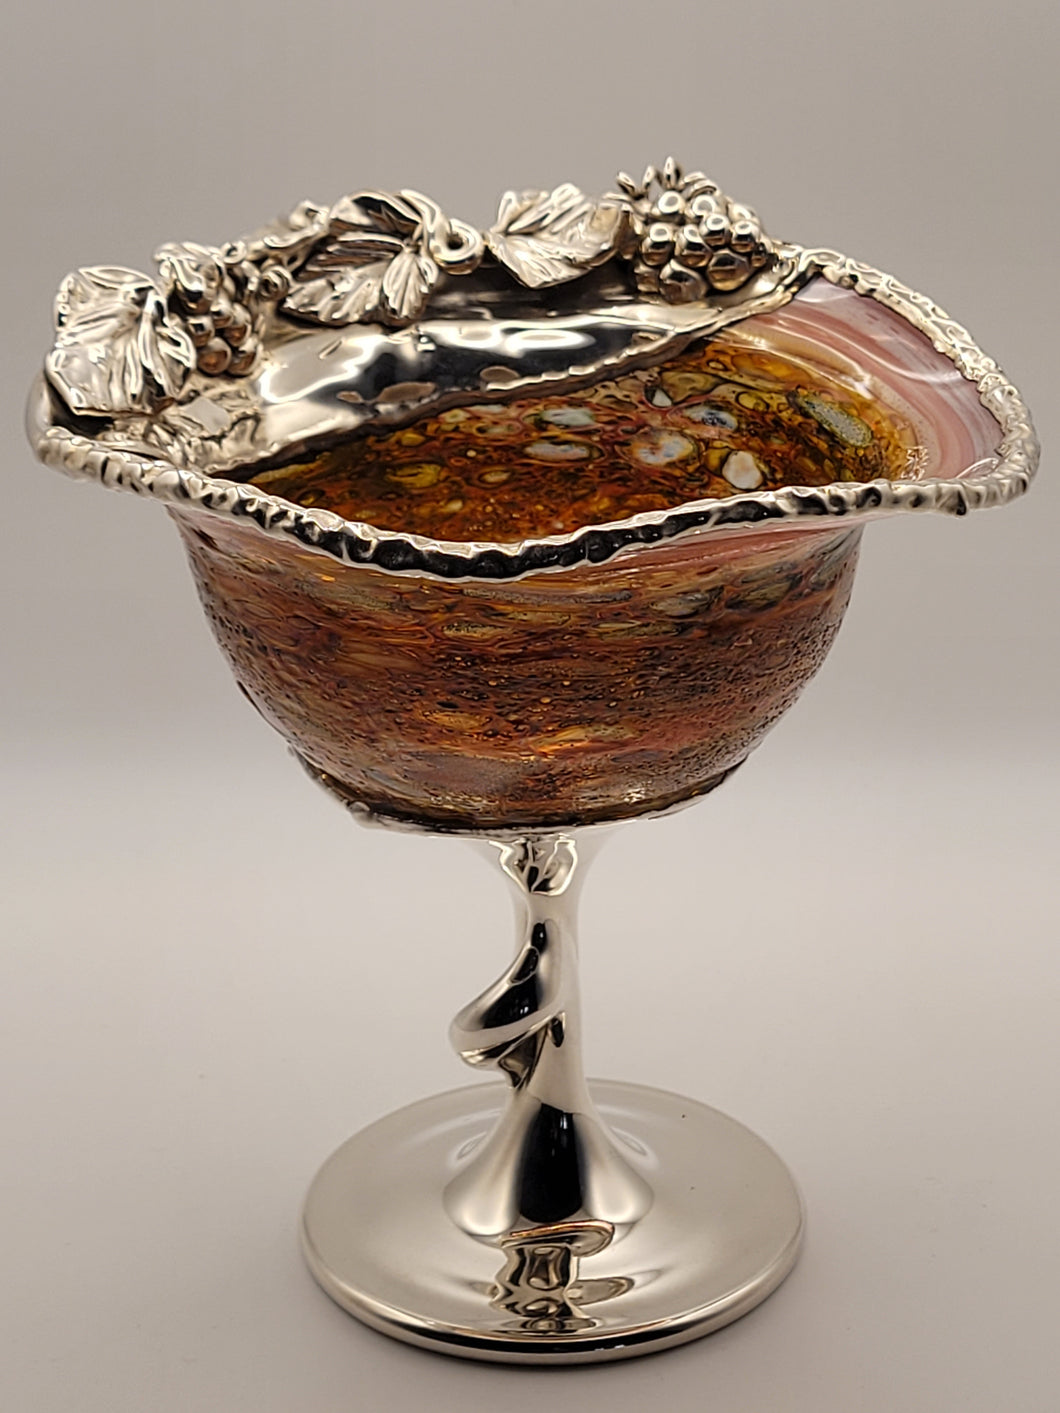 Glass and Sterling Silver Bowl on Pedestal